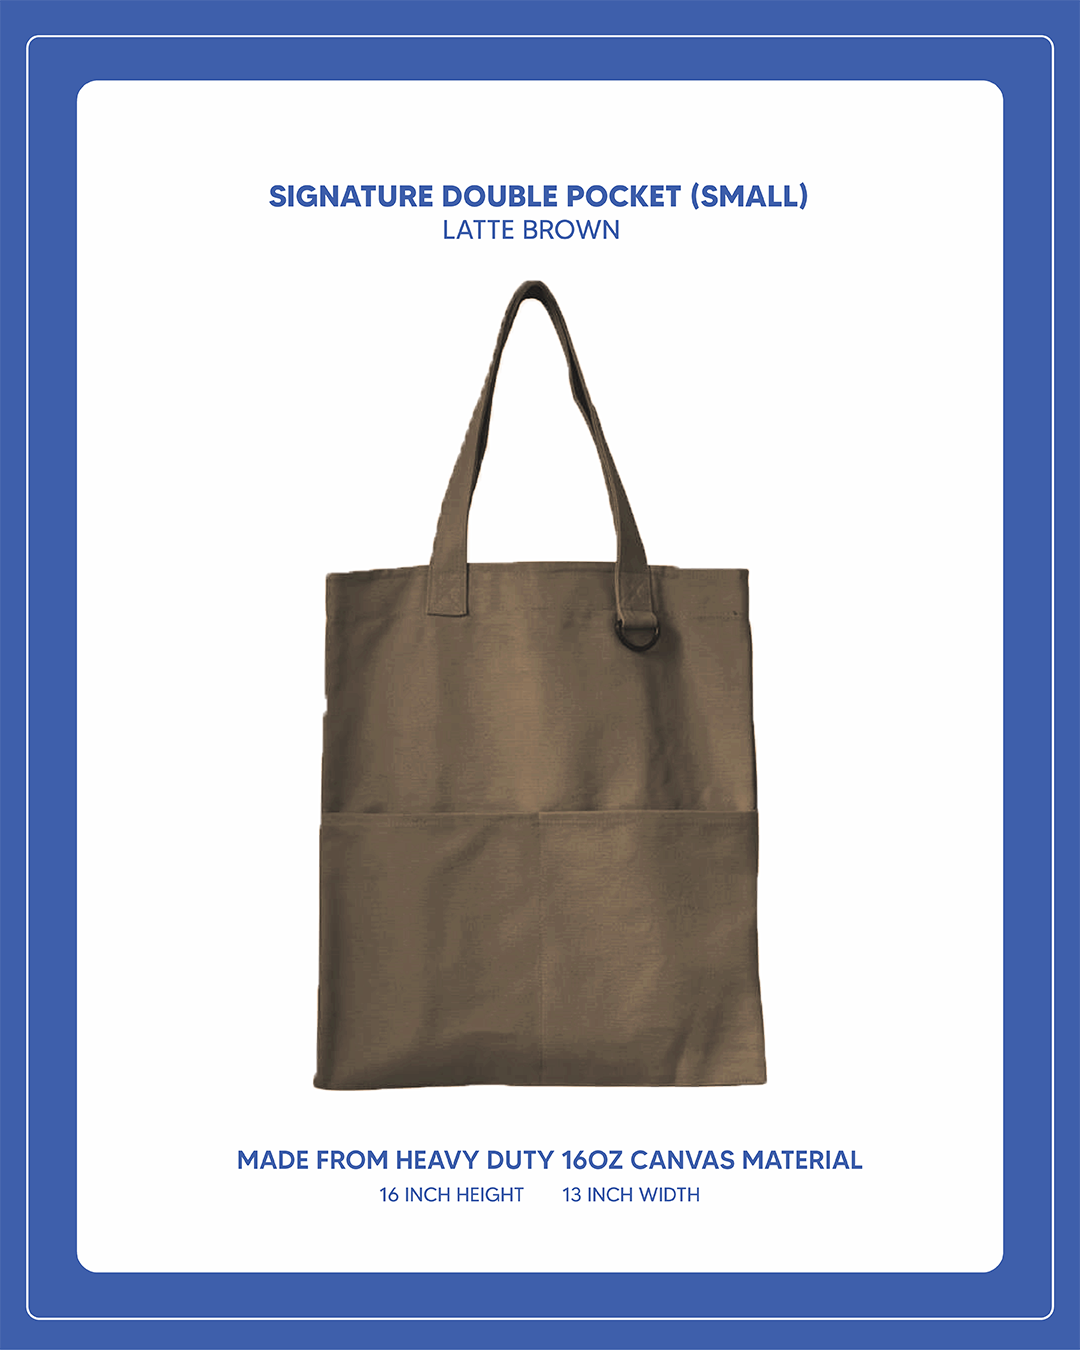 Double Pocket Signature Tote (Small) - Latte Brown